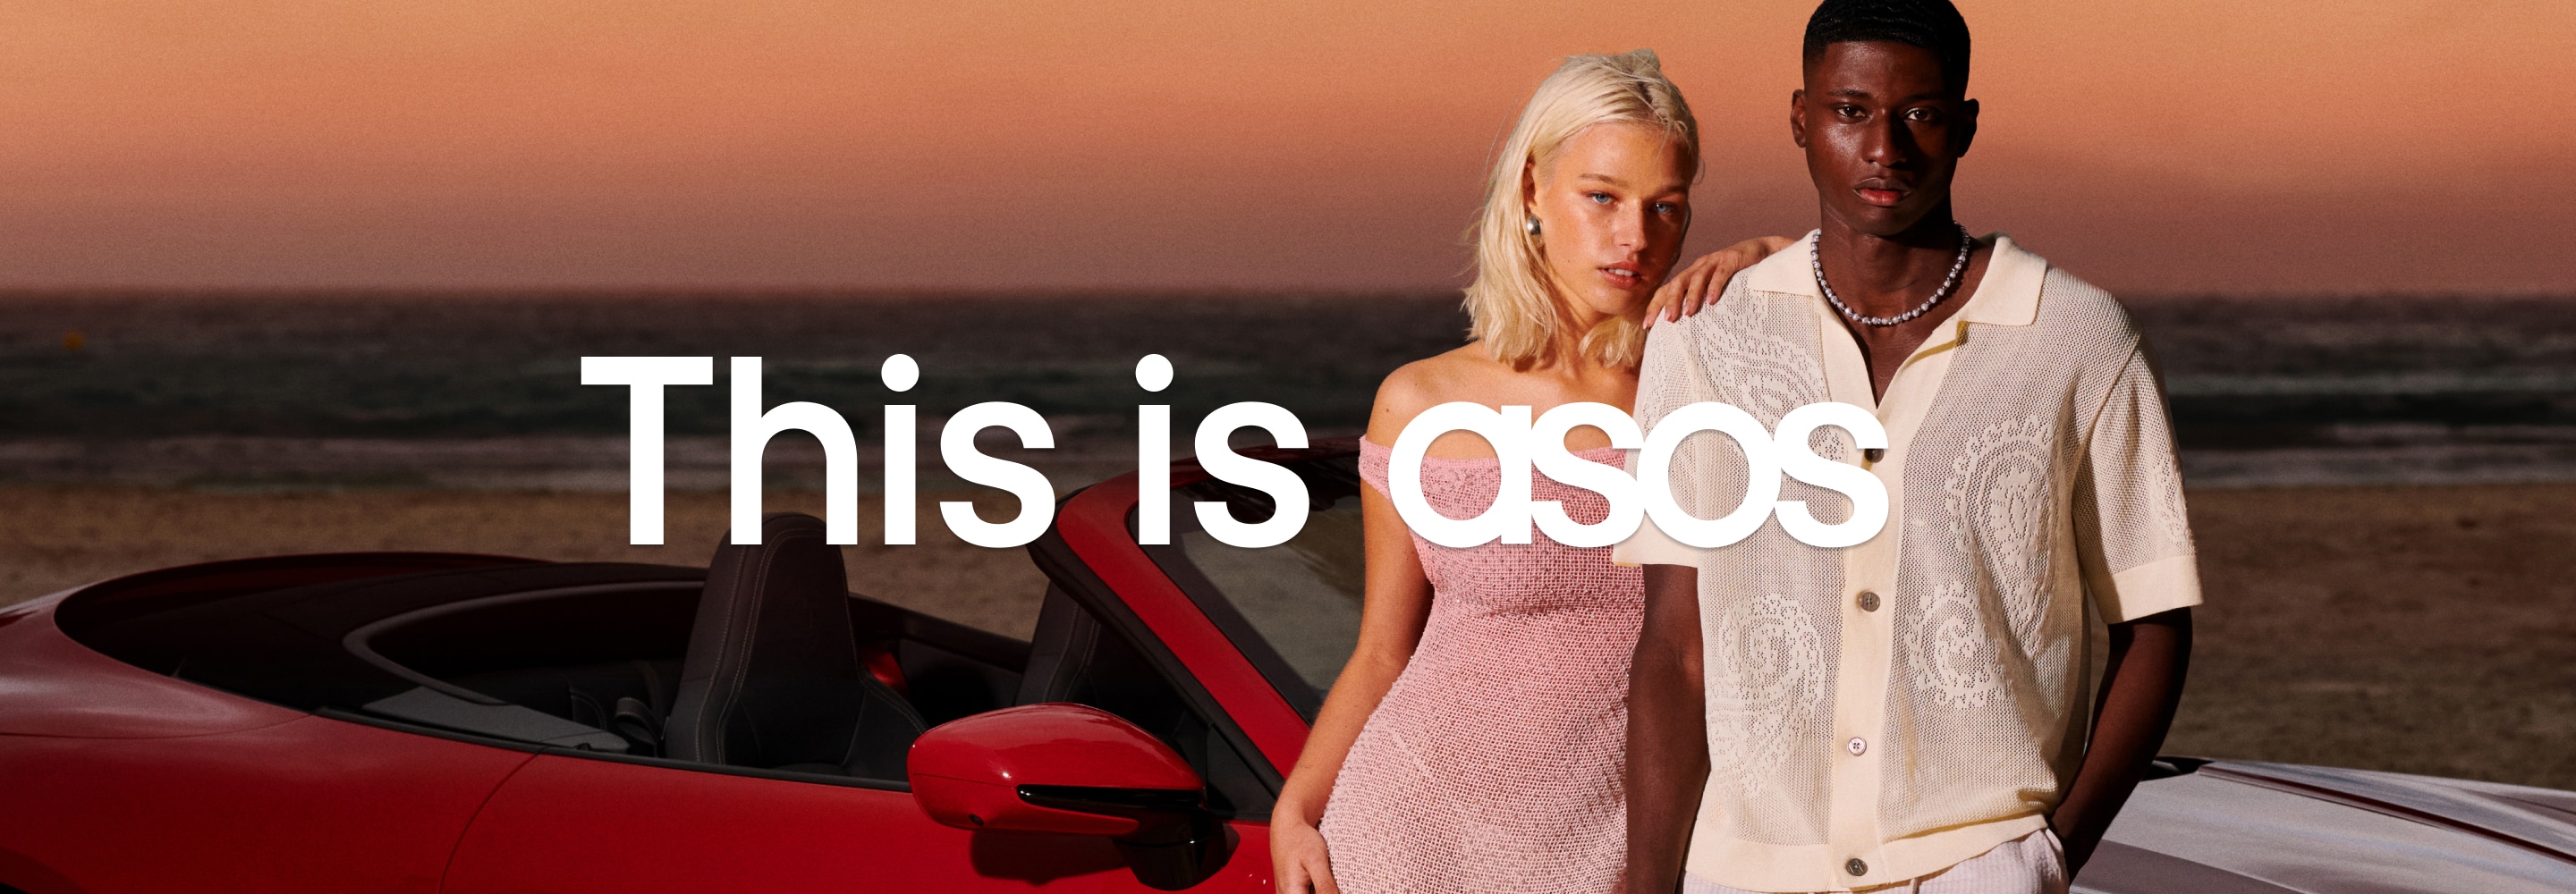 This is Asos